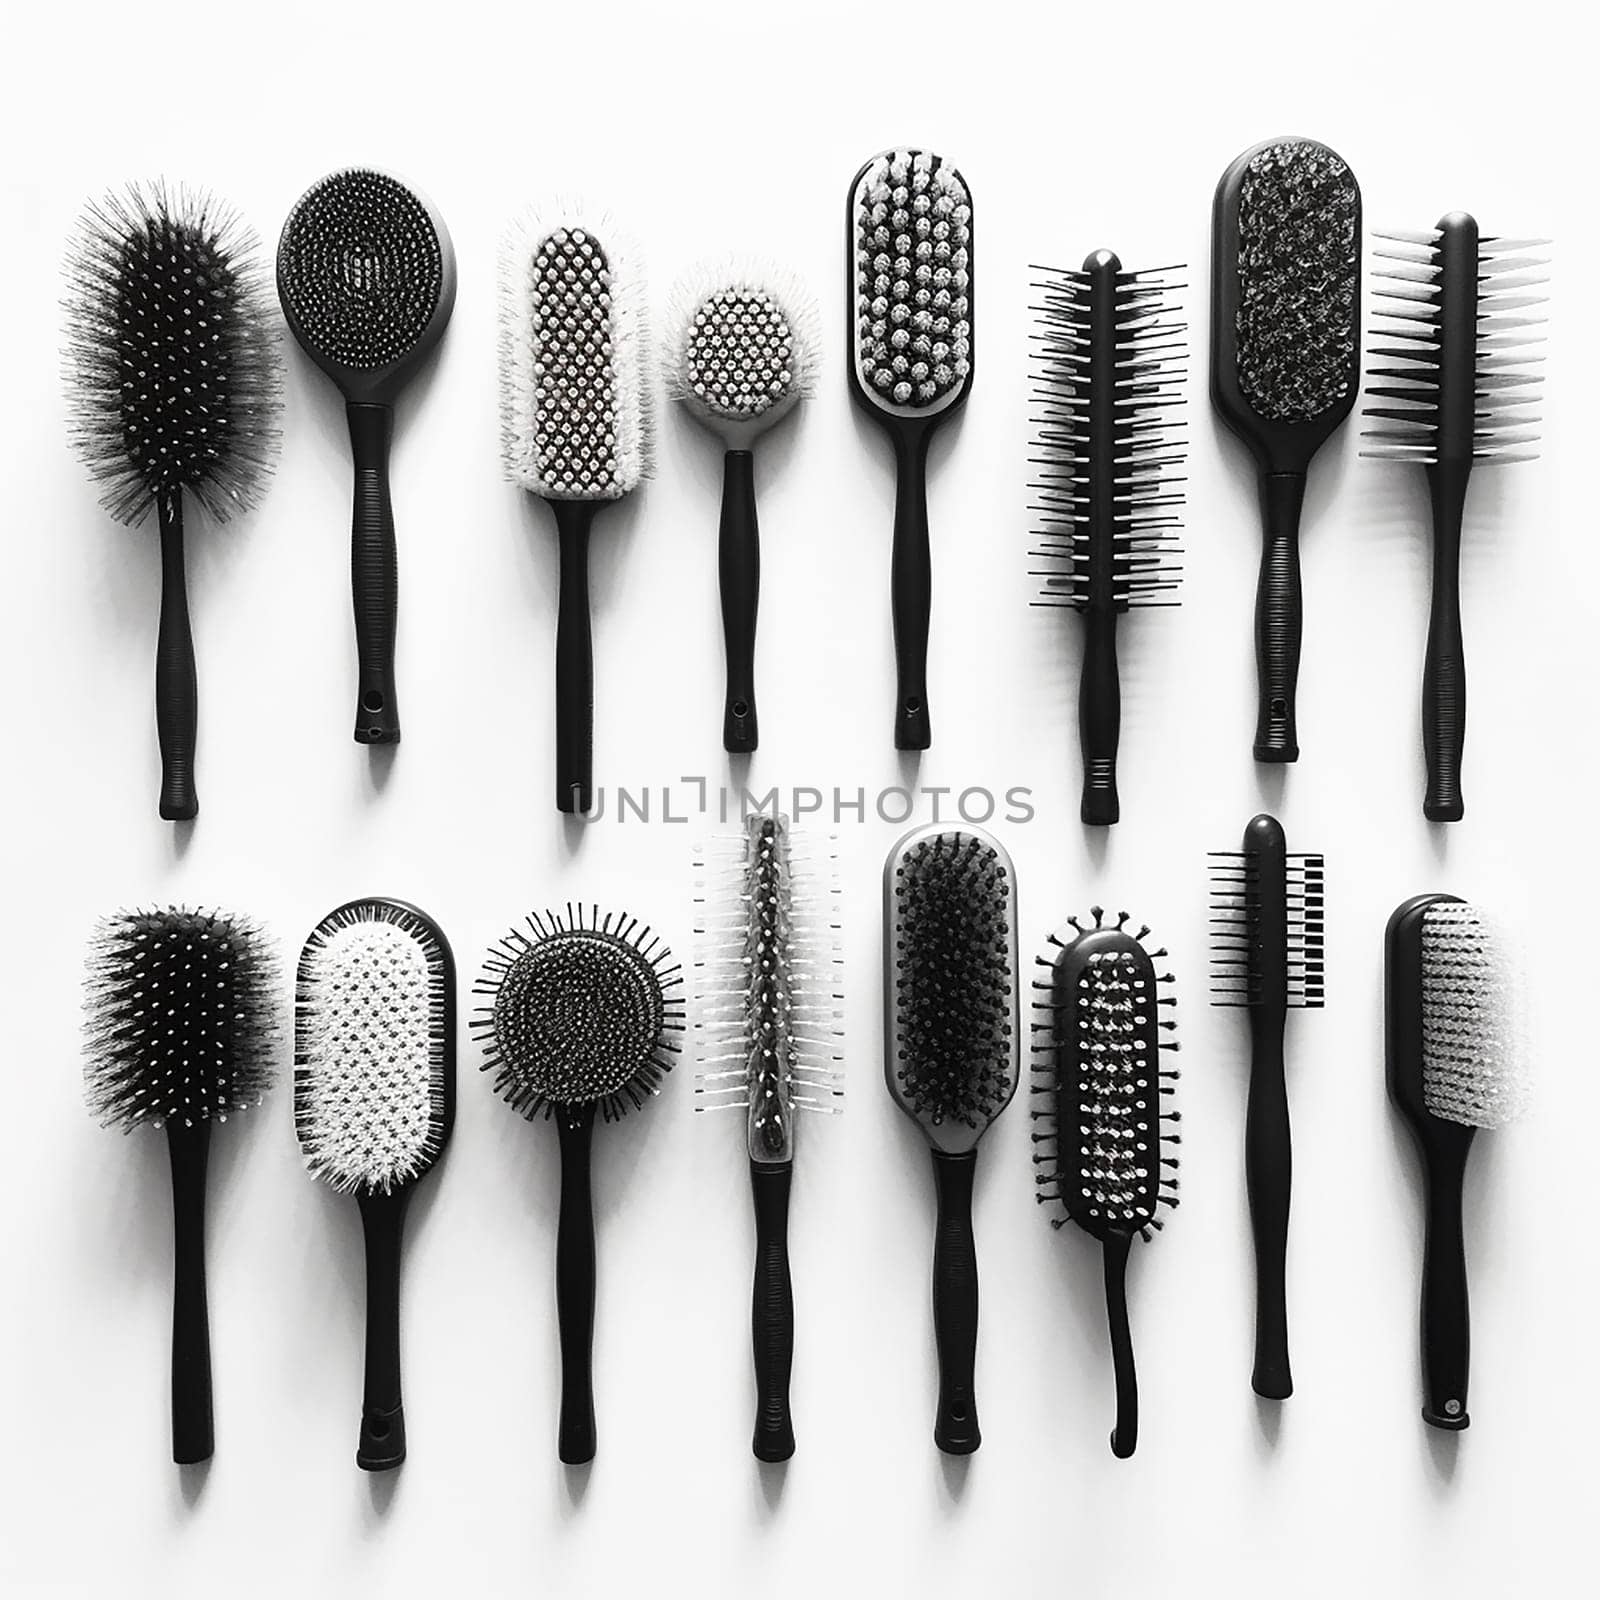 Assortment of various hairbrushes on a white background. by Hype2art